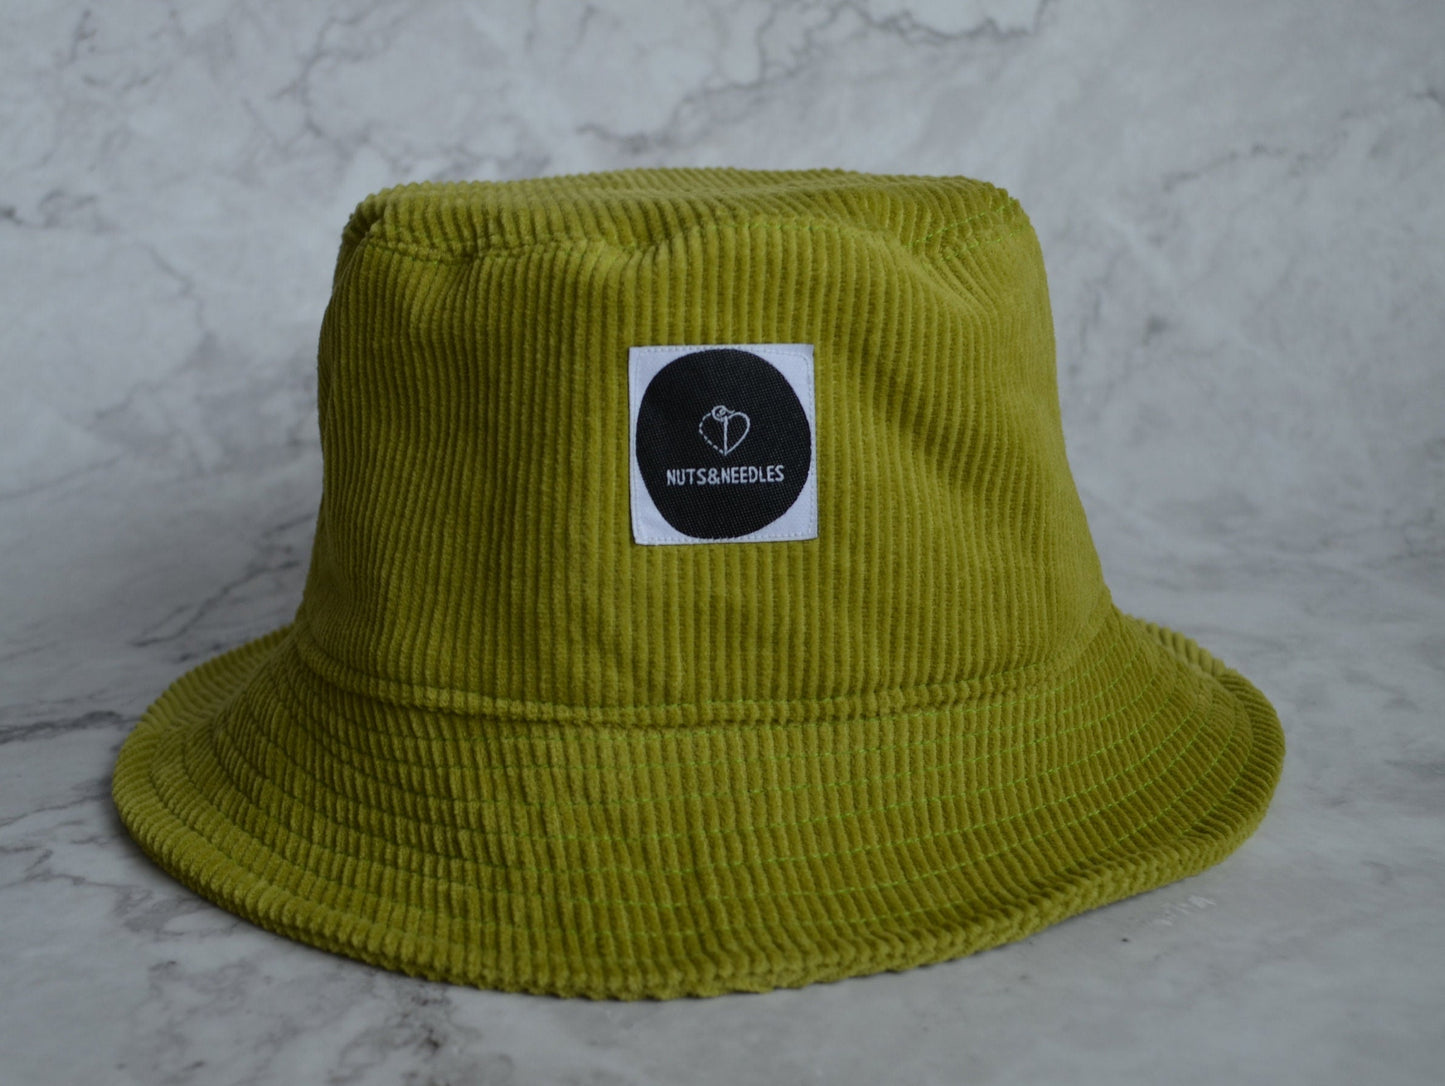 Bucket Hat 'Depression Awareness', part of profit donated to Depression Charity, Mental Health, handmade, self care, unisex urban style, DBT